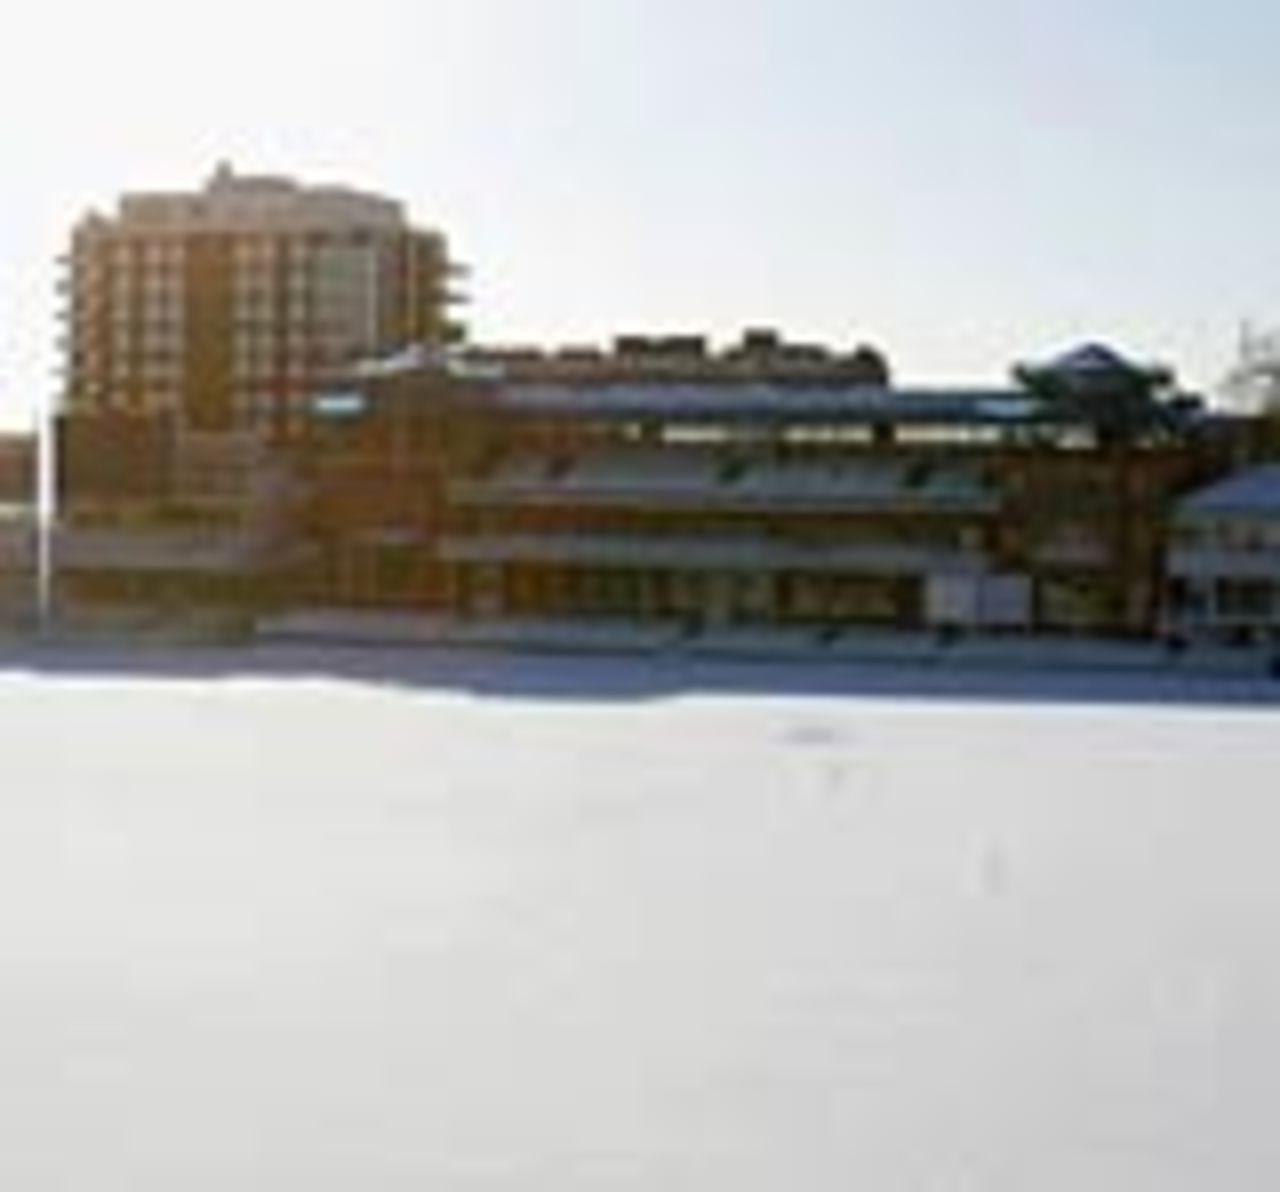 Lord's after winter snowfall, January 30, 2004